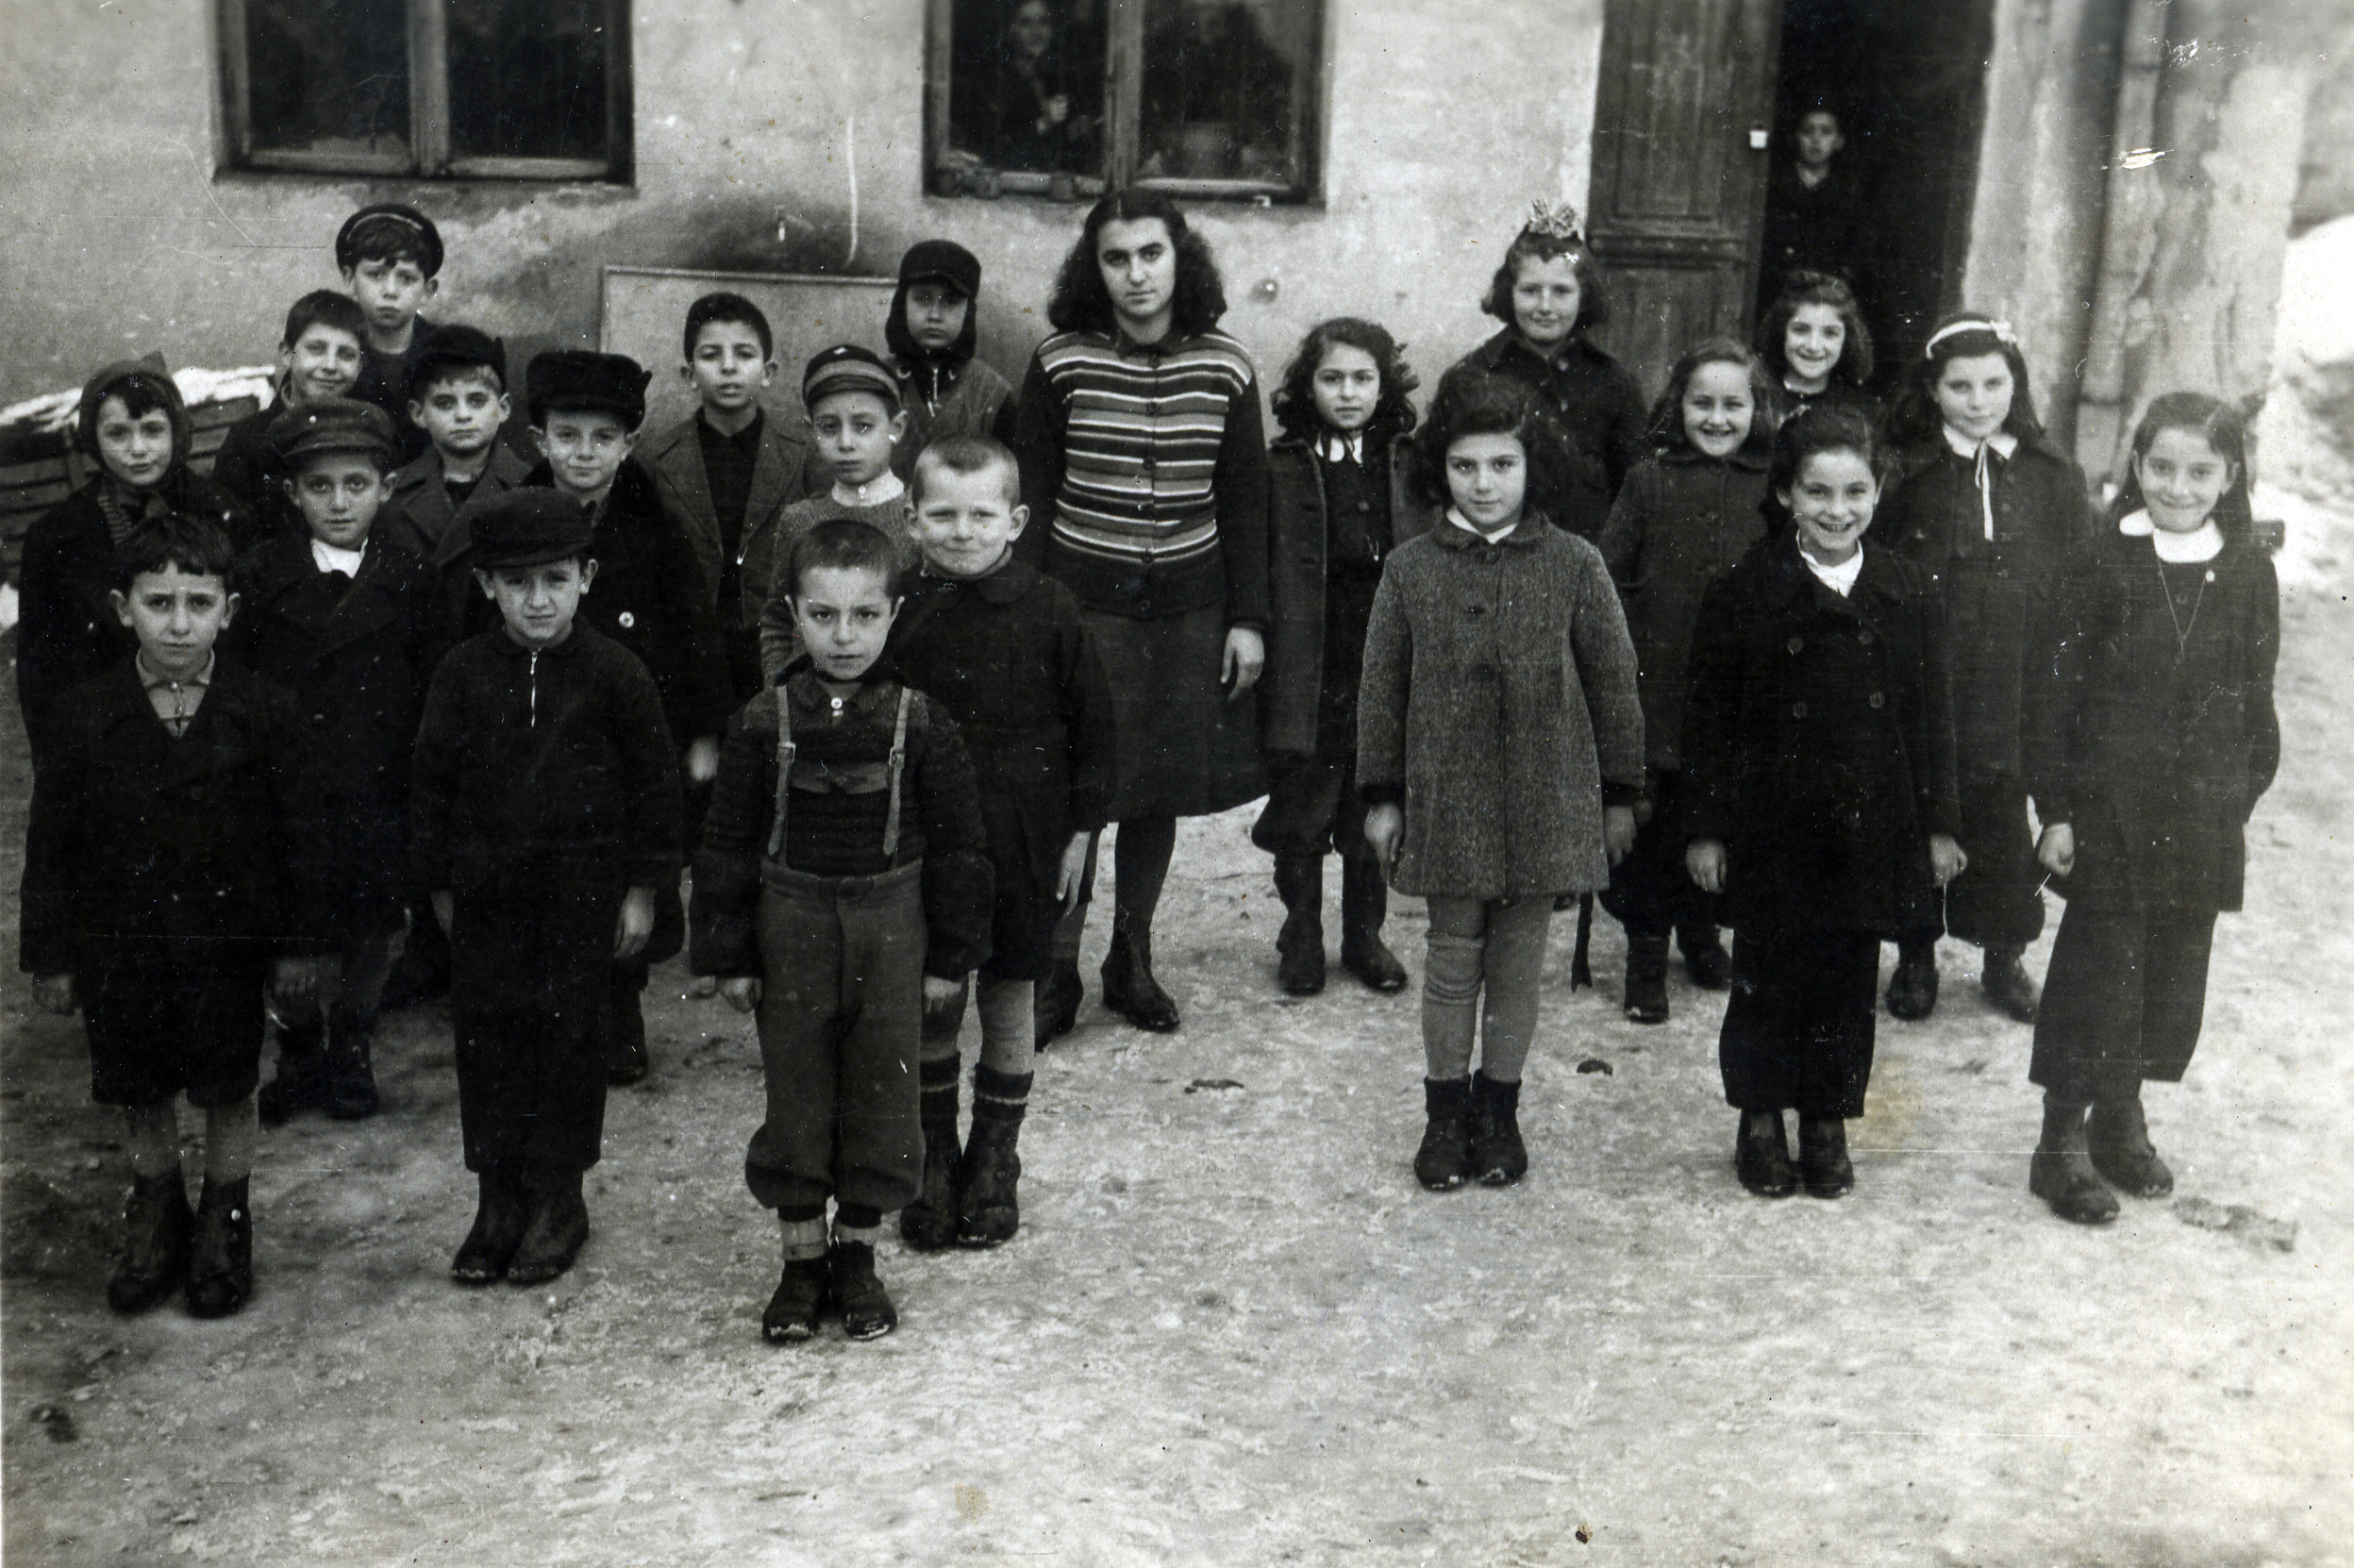 Children in the Jewish school in Ferdinand, Bulgaria.

Among those pictured is Avraham Alajem (back row, between the two windows).